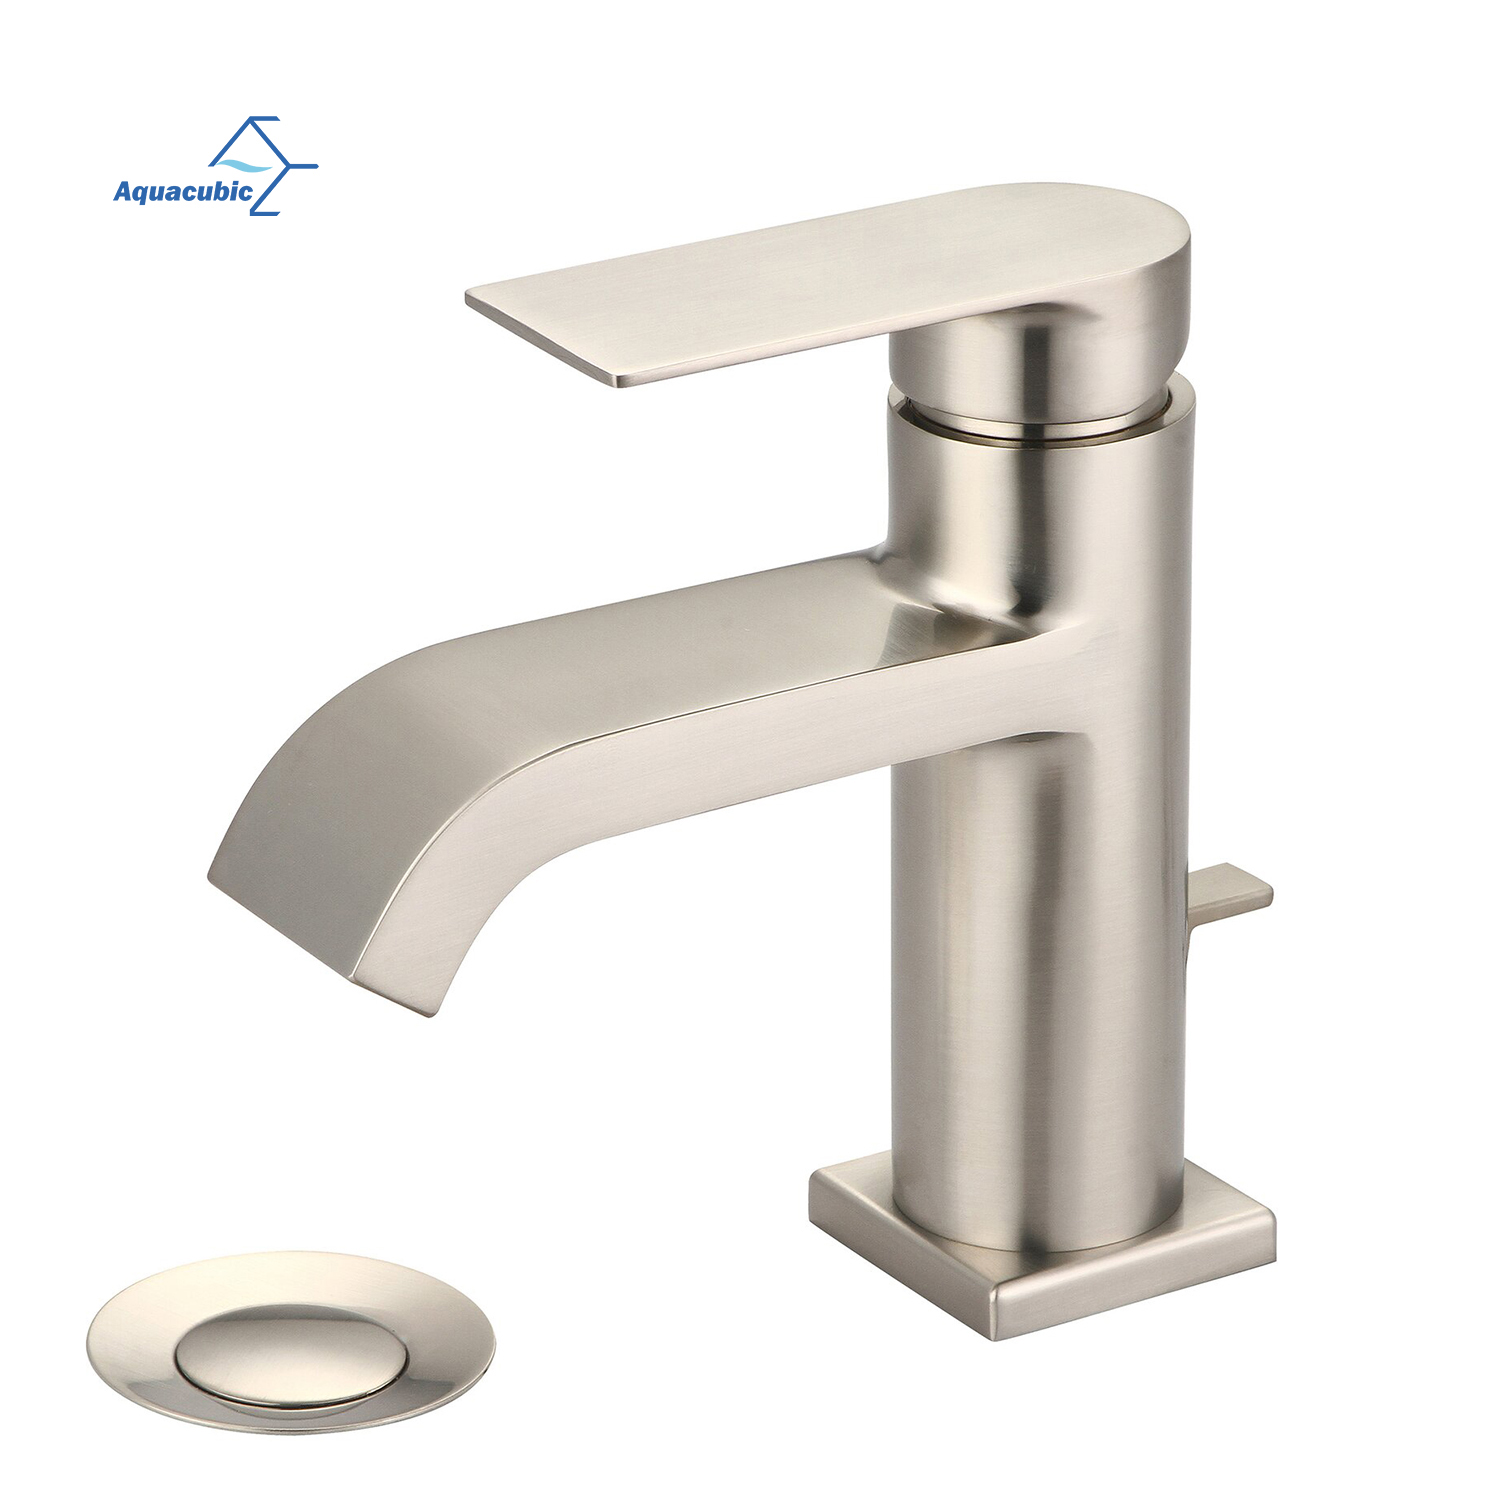 Deck mounted Basin Faucets Bathroom Tap, Faucets Mixers Taps Brass Water Multifunctional Bathroom Sink Faucet